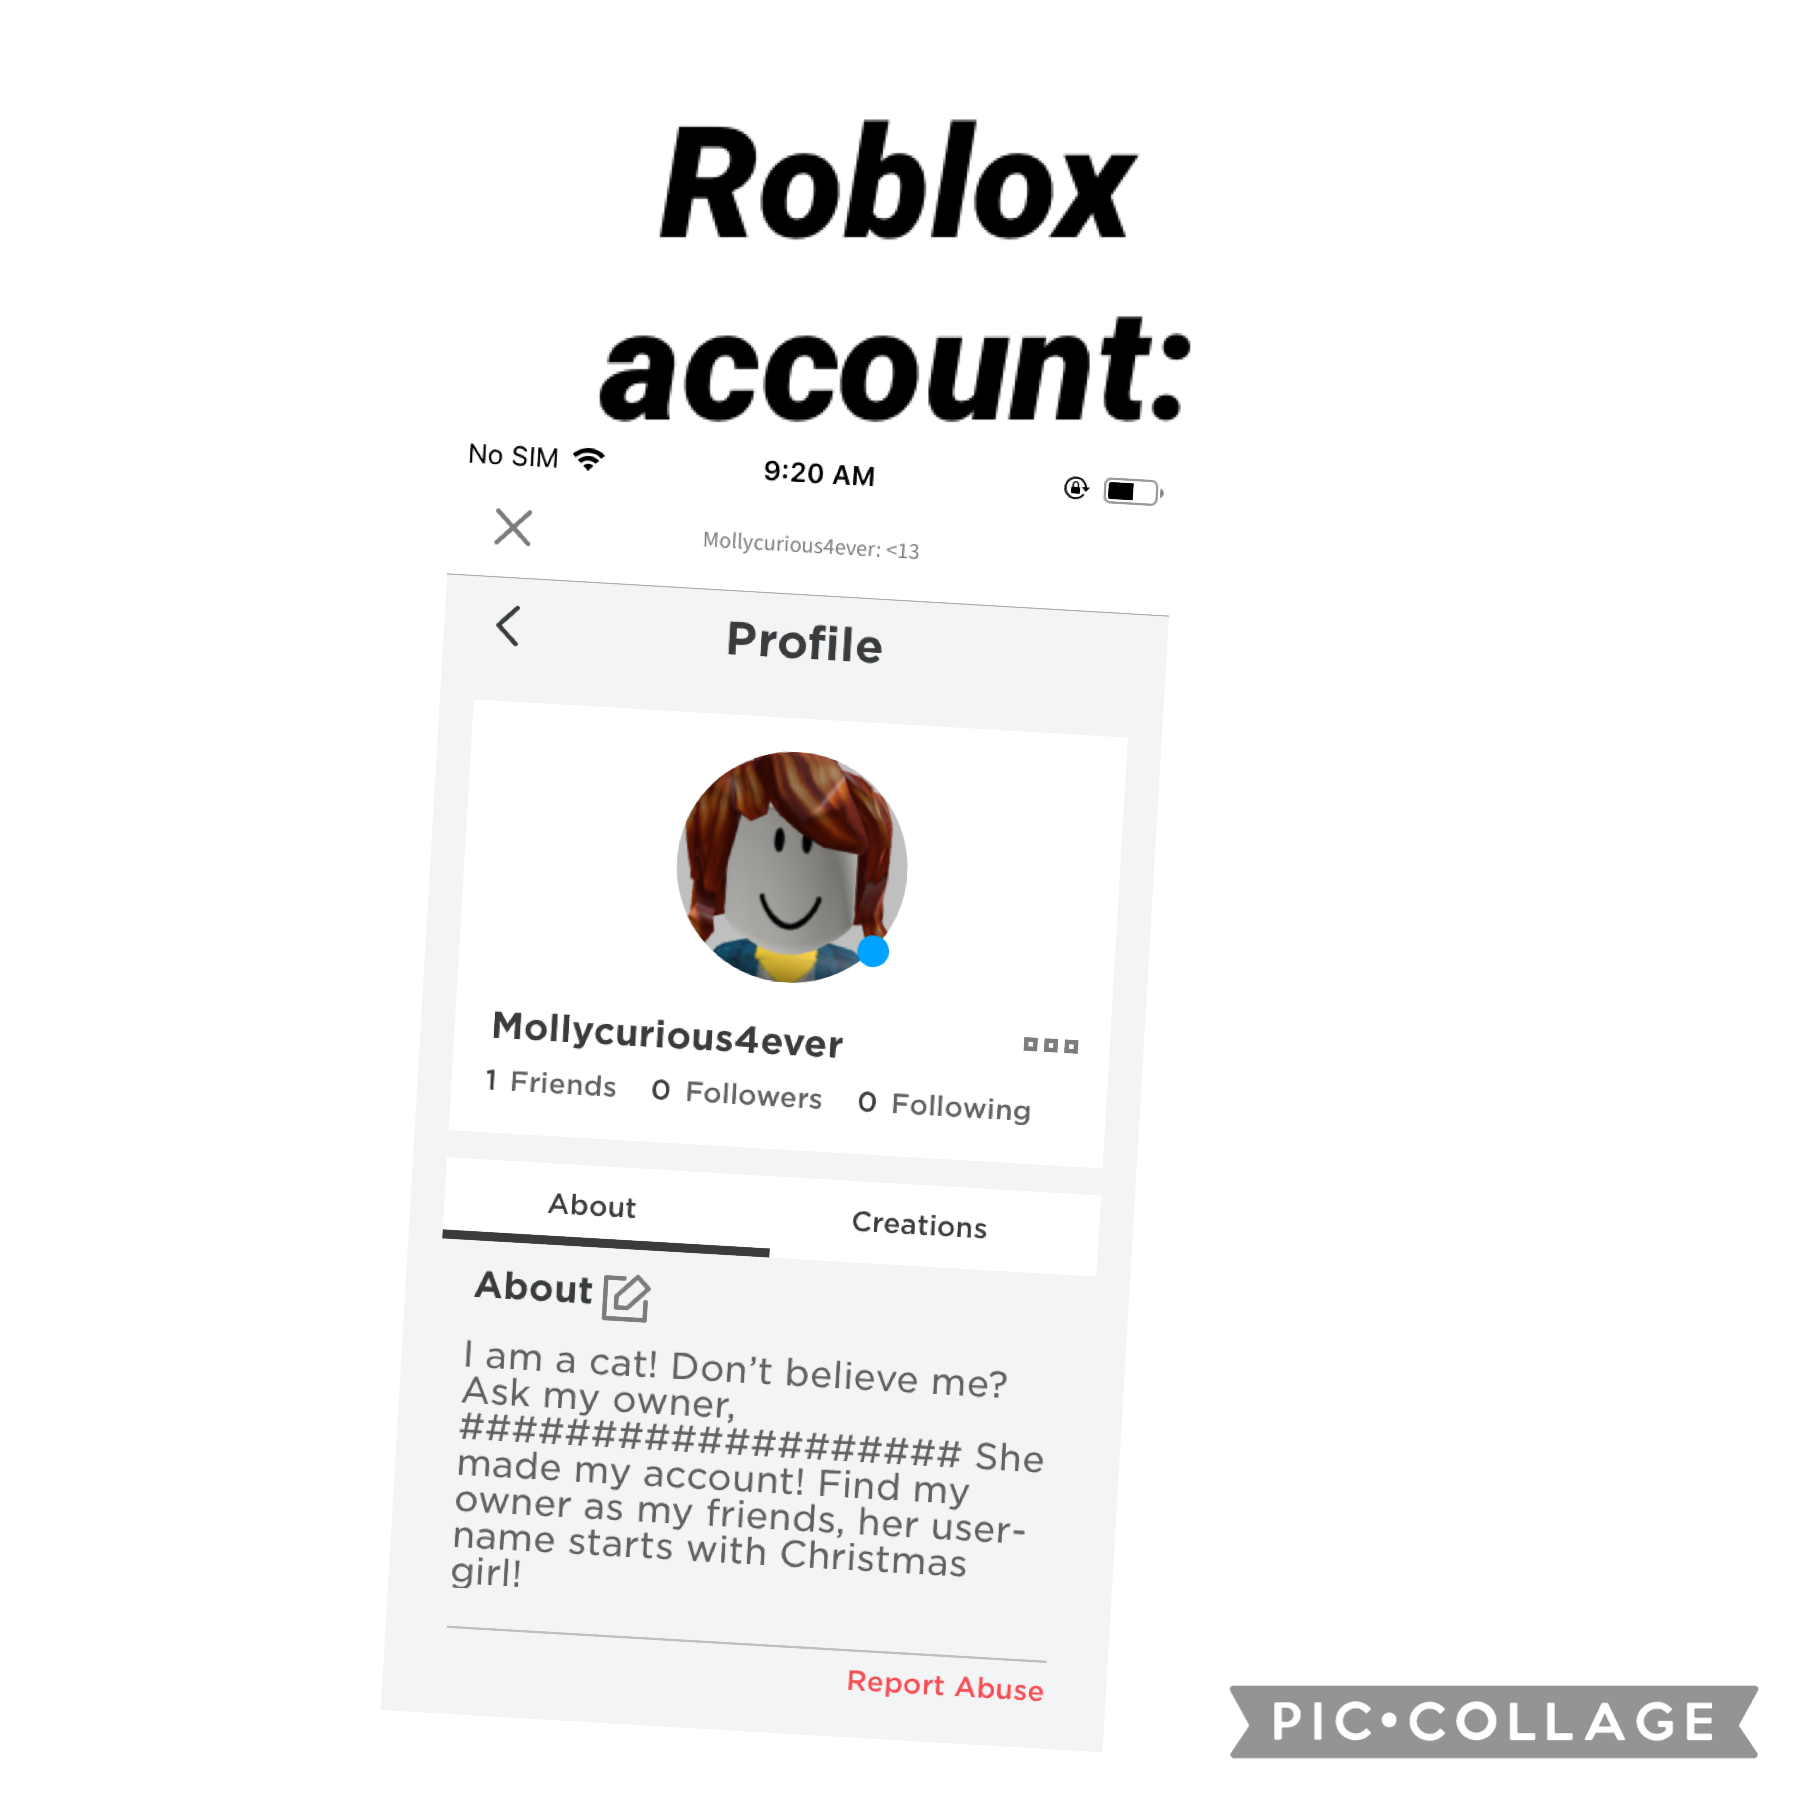 😺Tap😺

Follow and friend Molly on Roblox! User: Mollycurious4ever